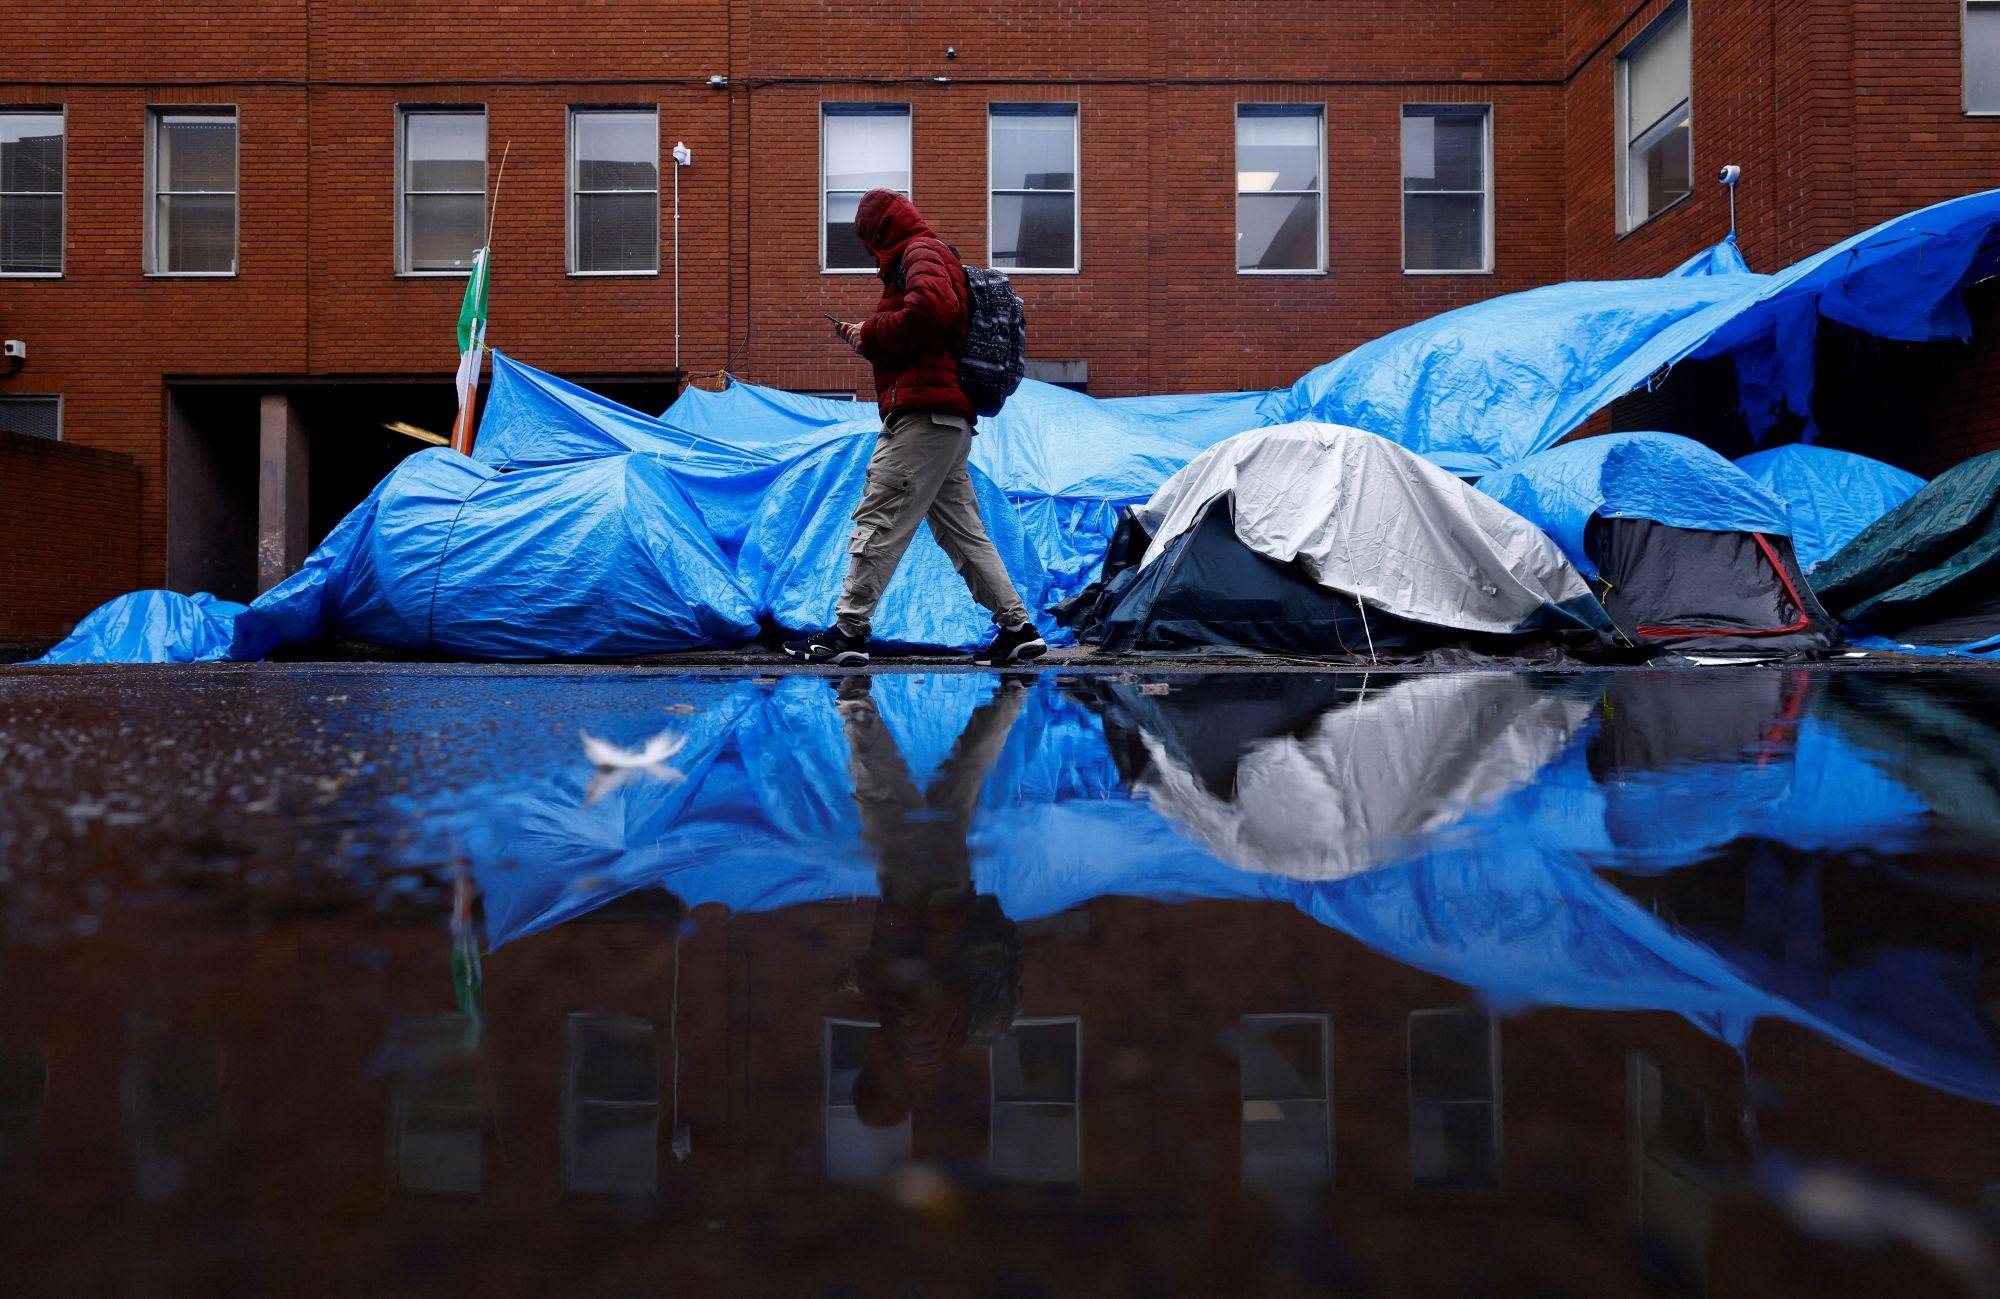 Dublin asylum seekers moved from Mount Street tents